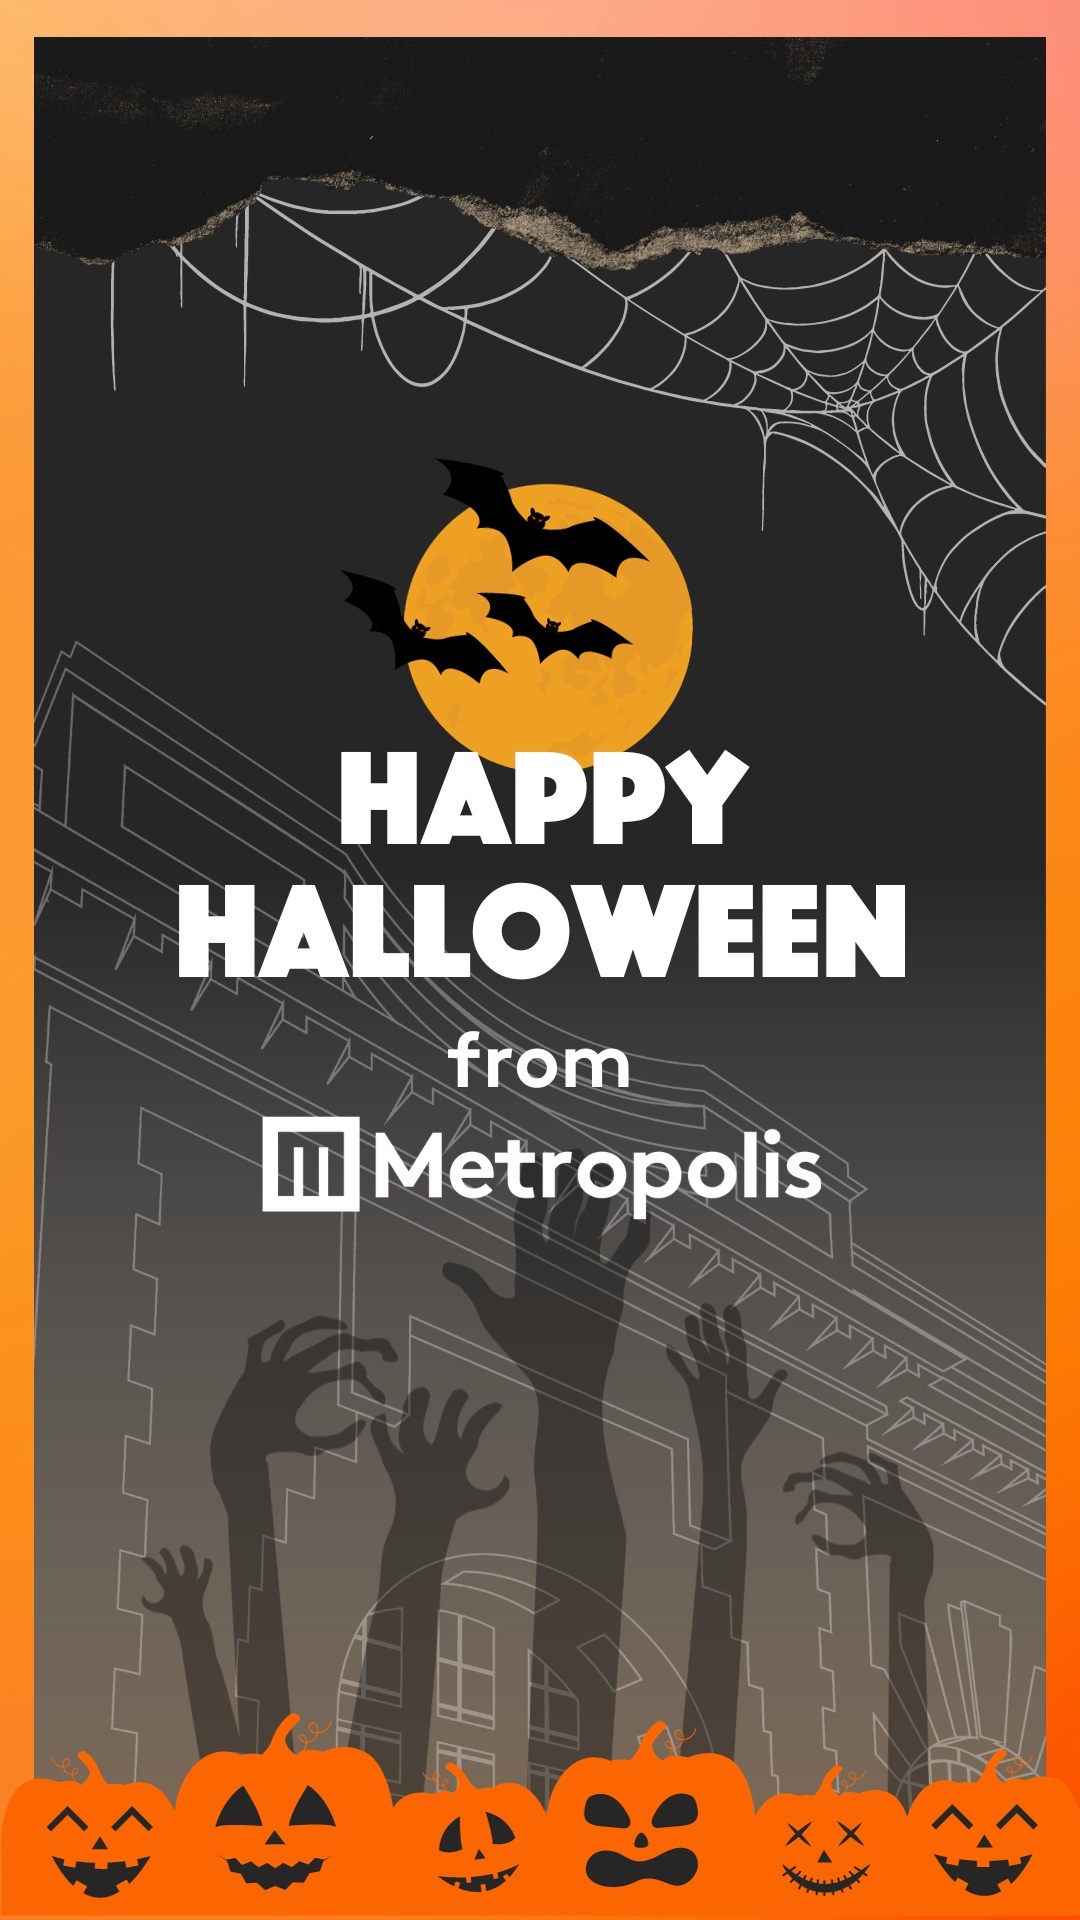 Halloween is just around the corner!
Are you trick or treating this year? Got party plans?
Let’s see what tricks or treats are in store at Metropolis.